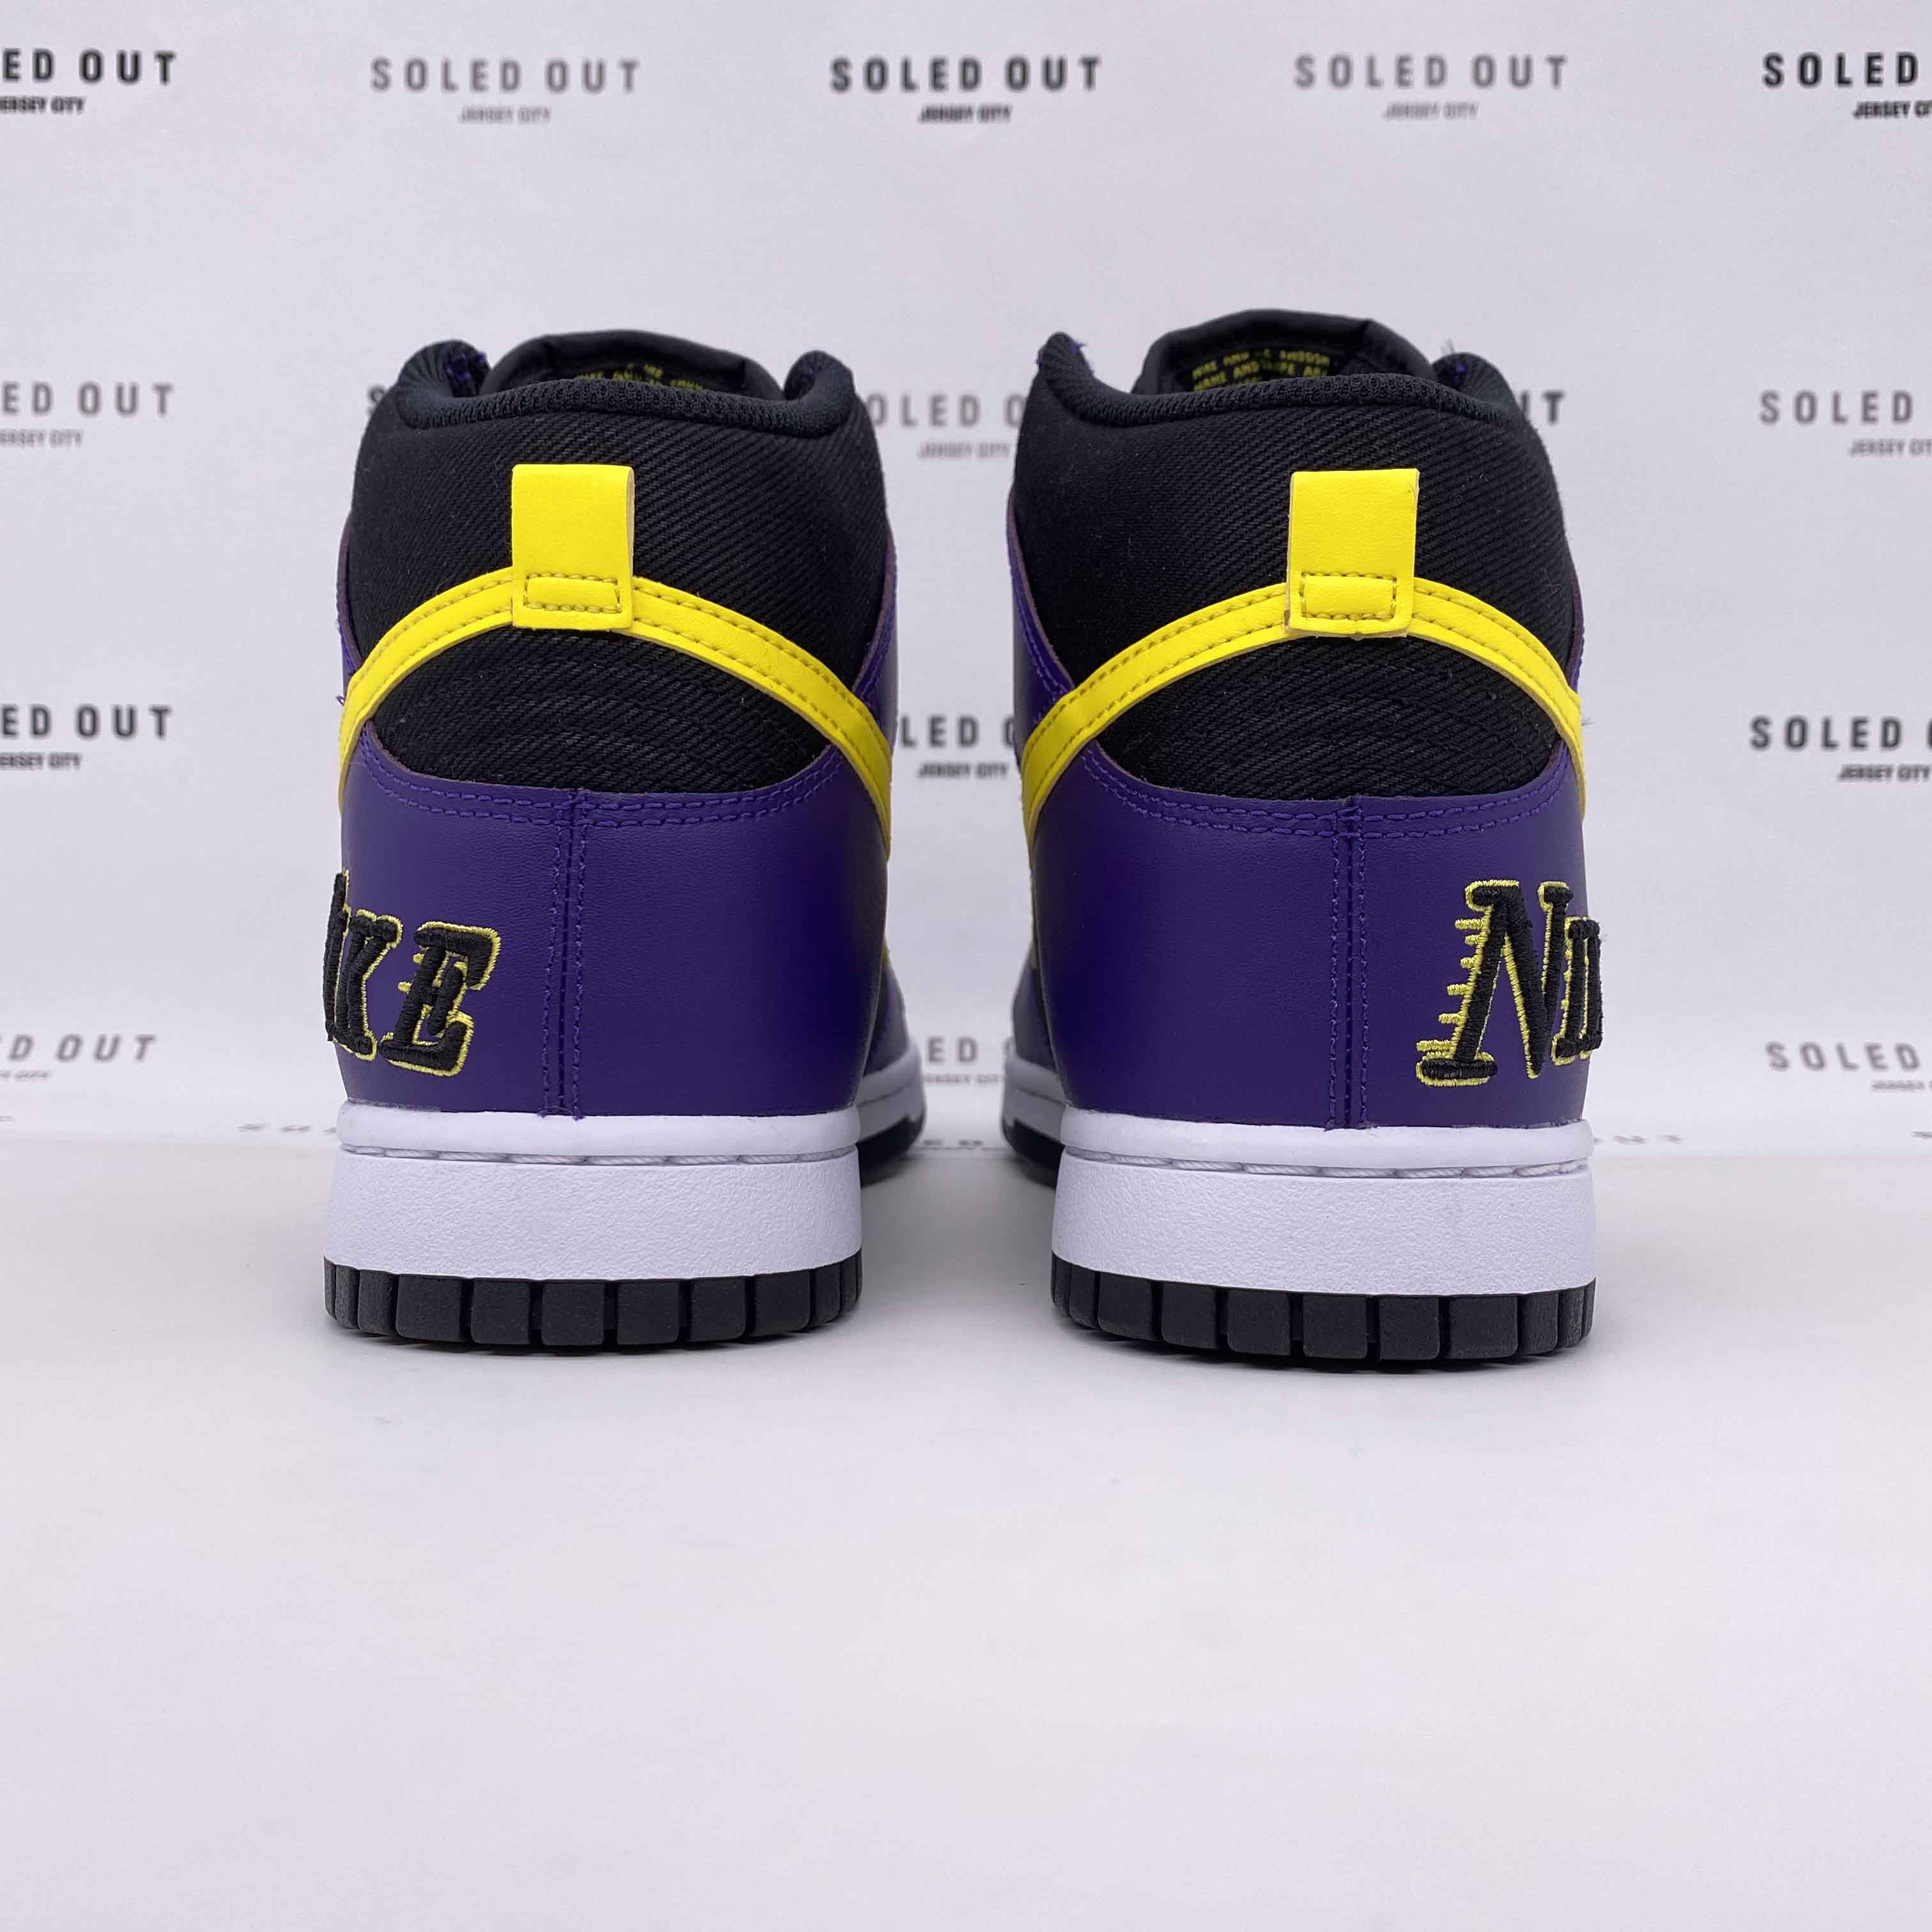 Nike Dunk High PRM "Lakers" 2021 New Size 10